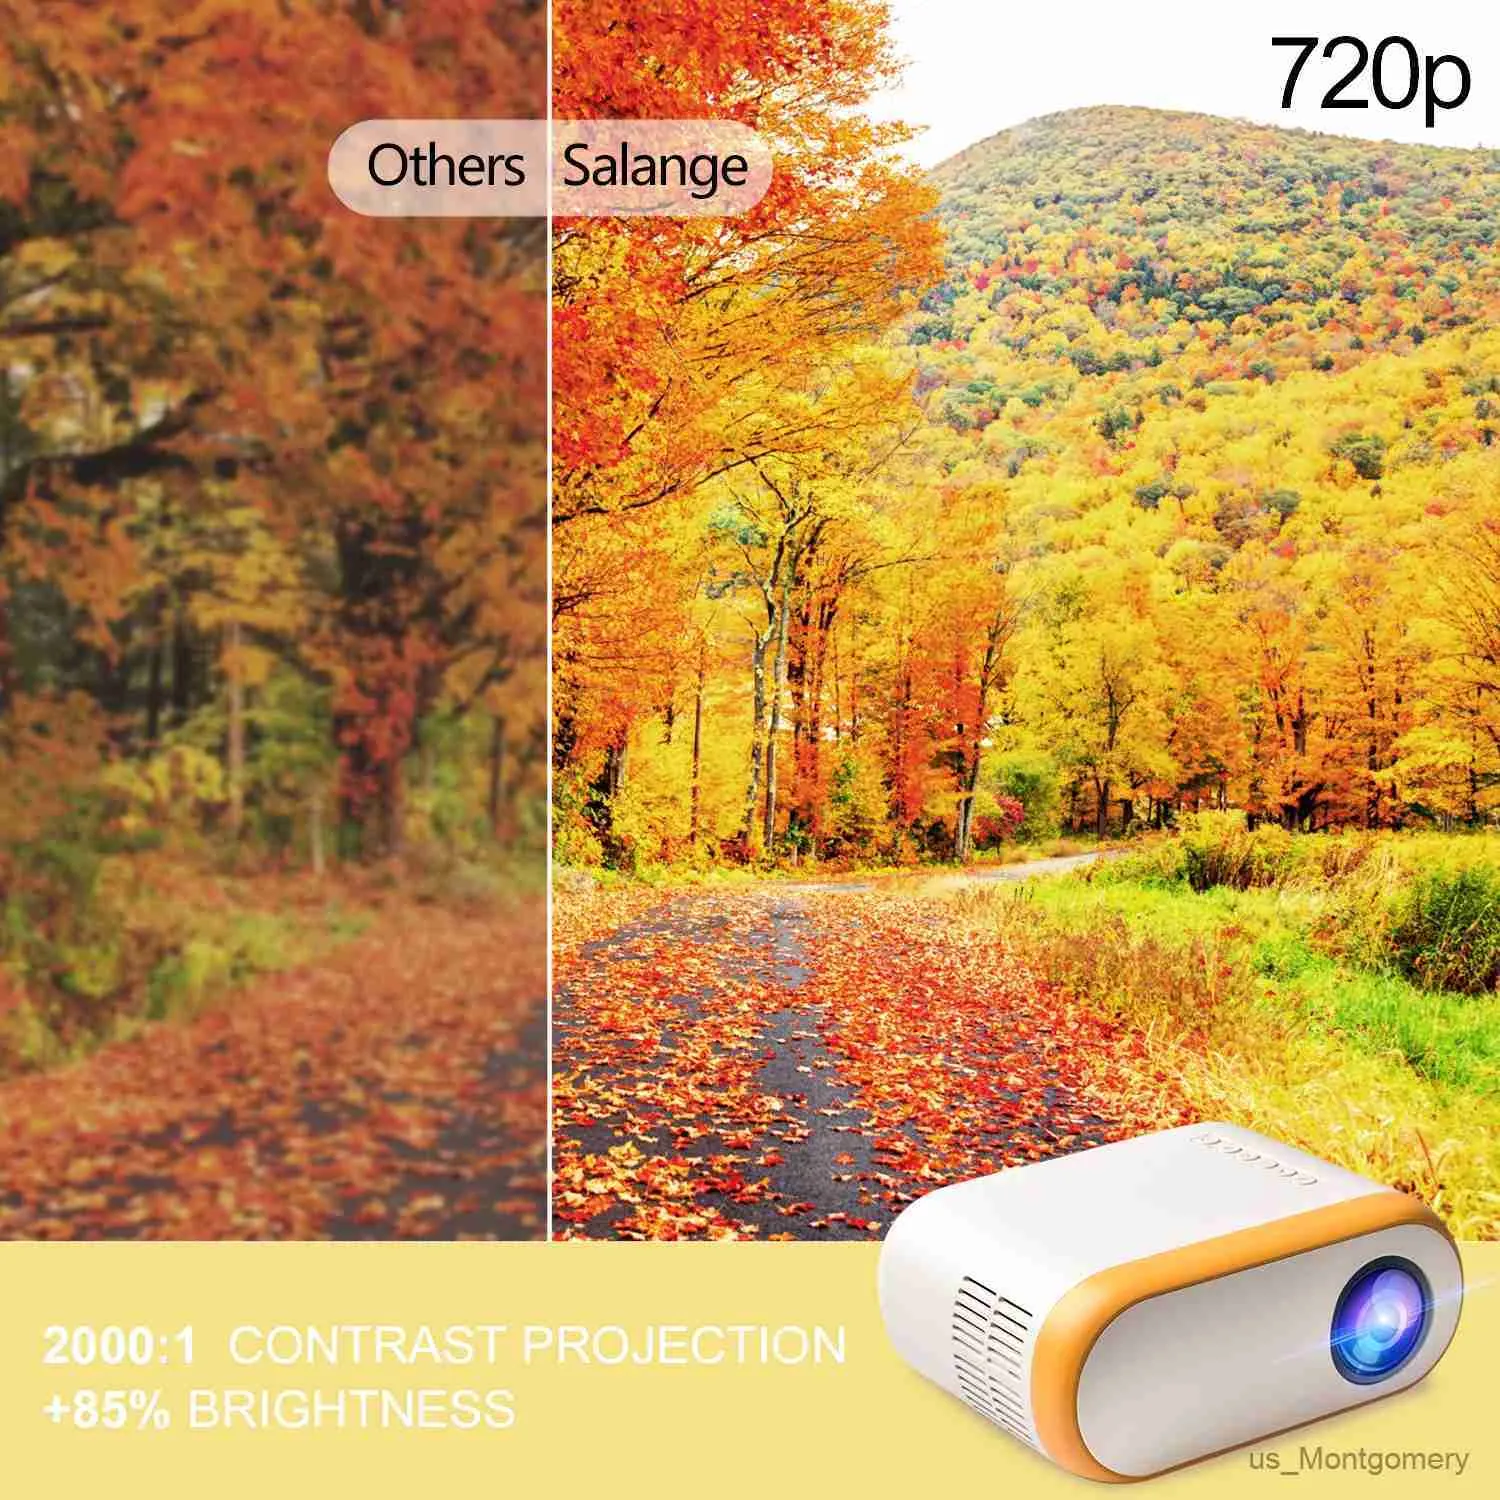 Projectors Q11 Mini Portable Projector Native 1280 x 720P for Home Theatre Airplay Maircast Smart Phone Multimedia LED Video Beamer